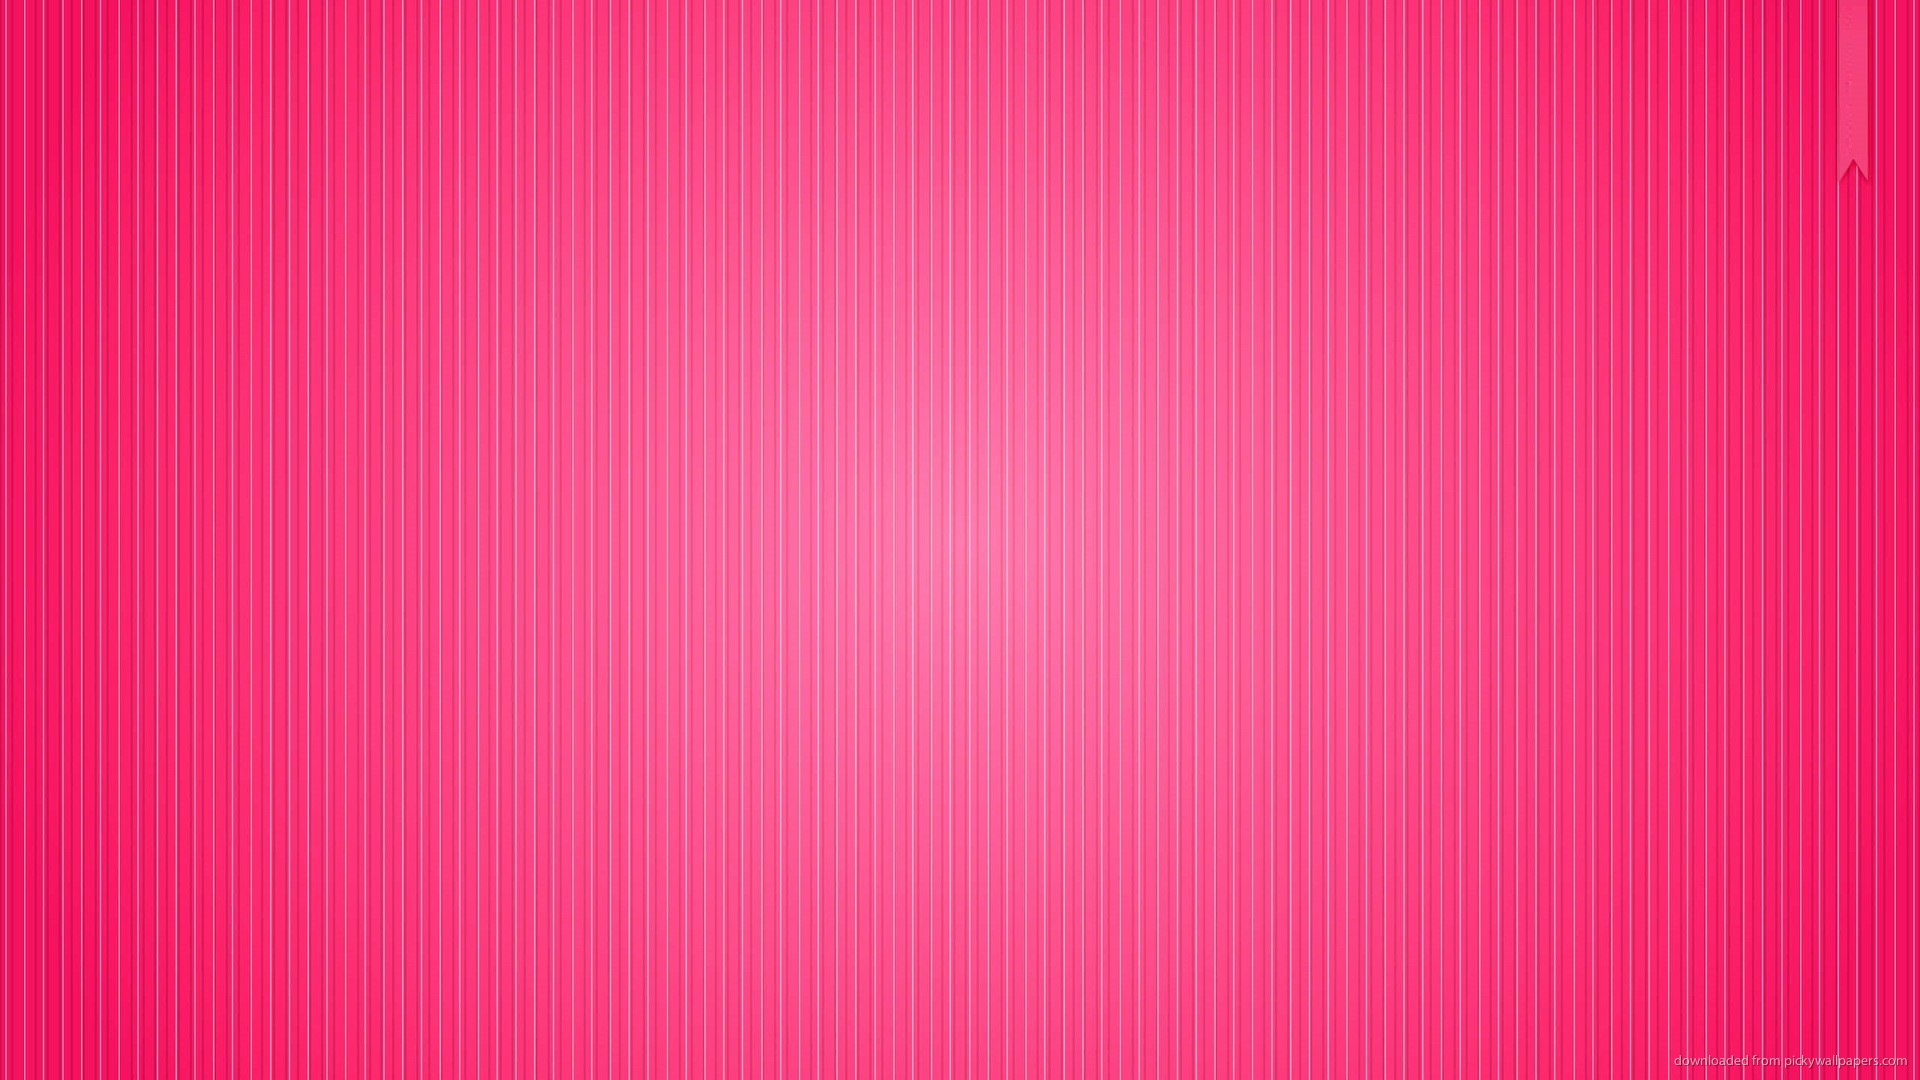 Valentine S Day Pink Striped Background Picture For iPhone Blackberry